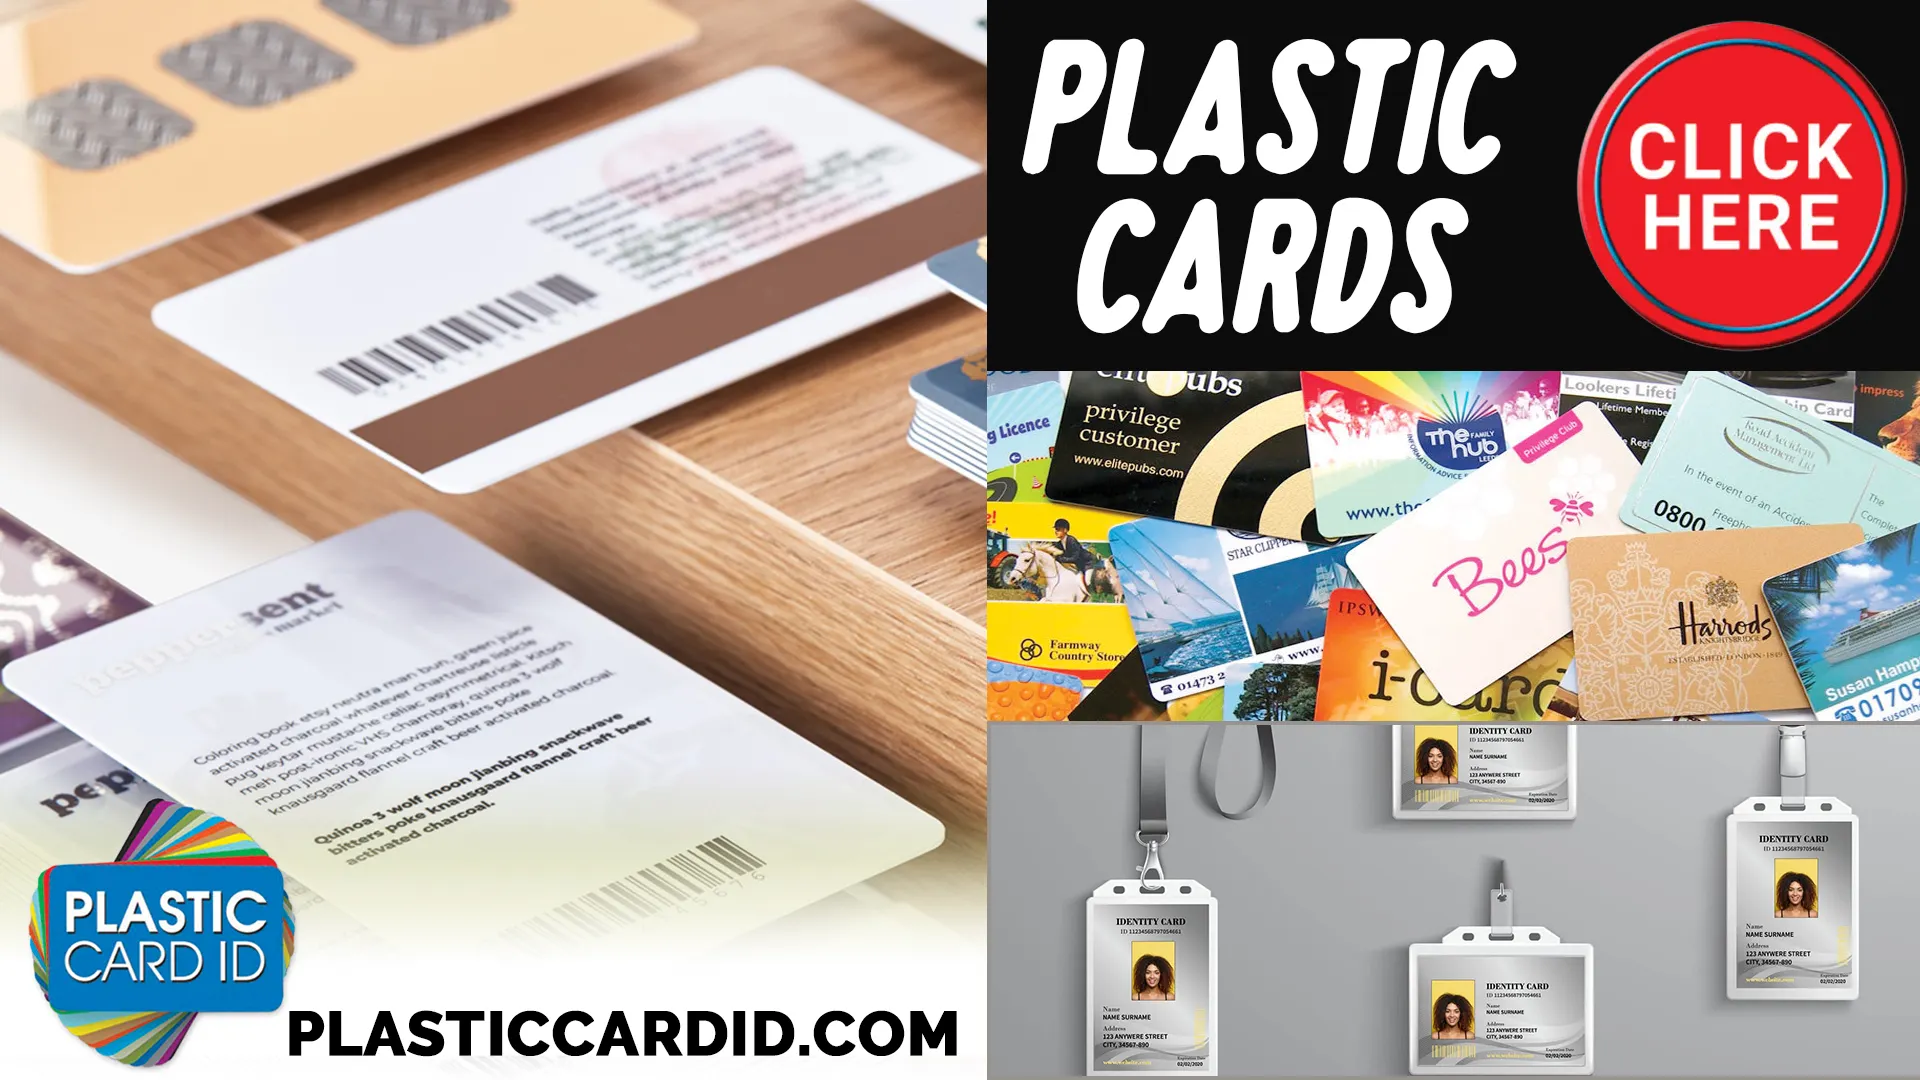  Holistic Customer Support from Plastic Card ID
 